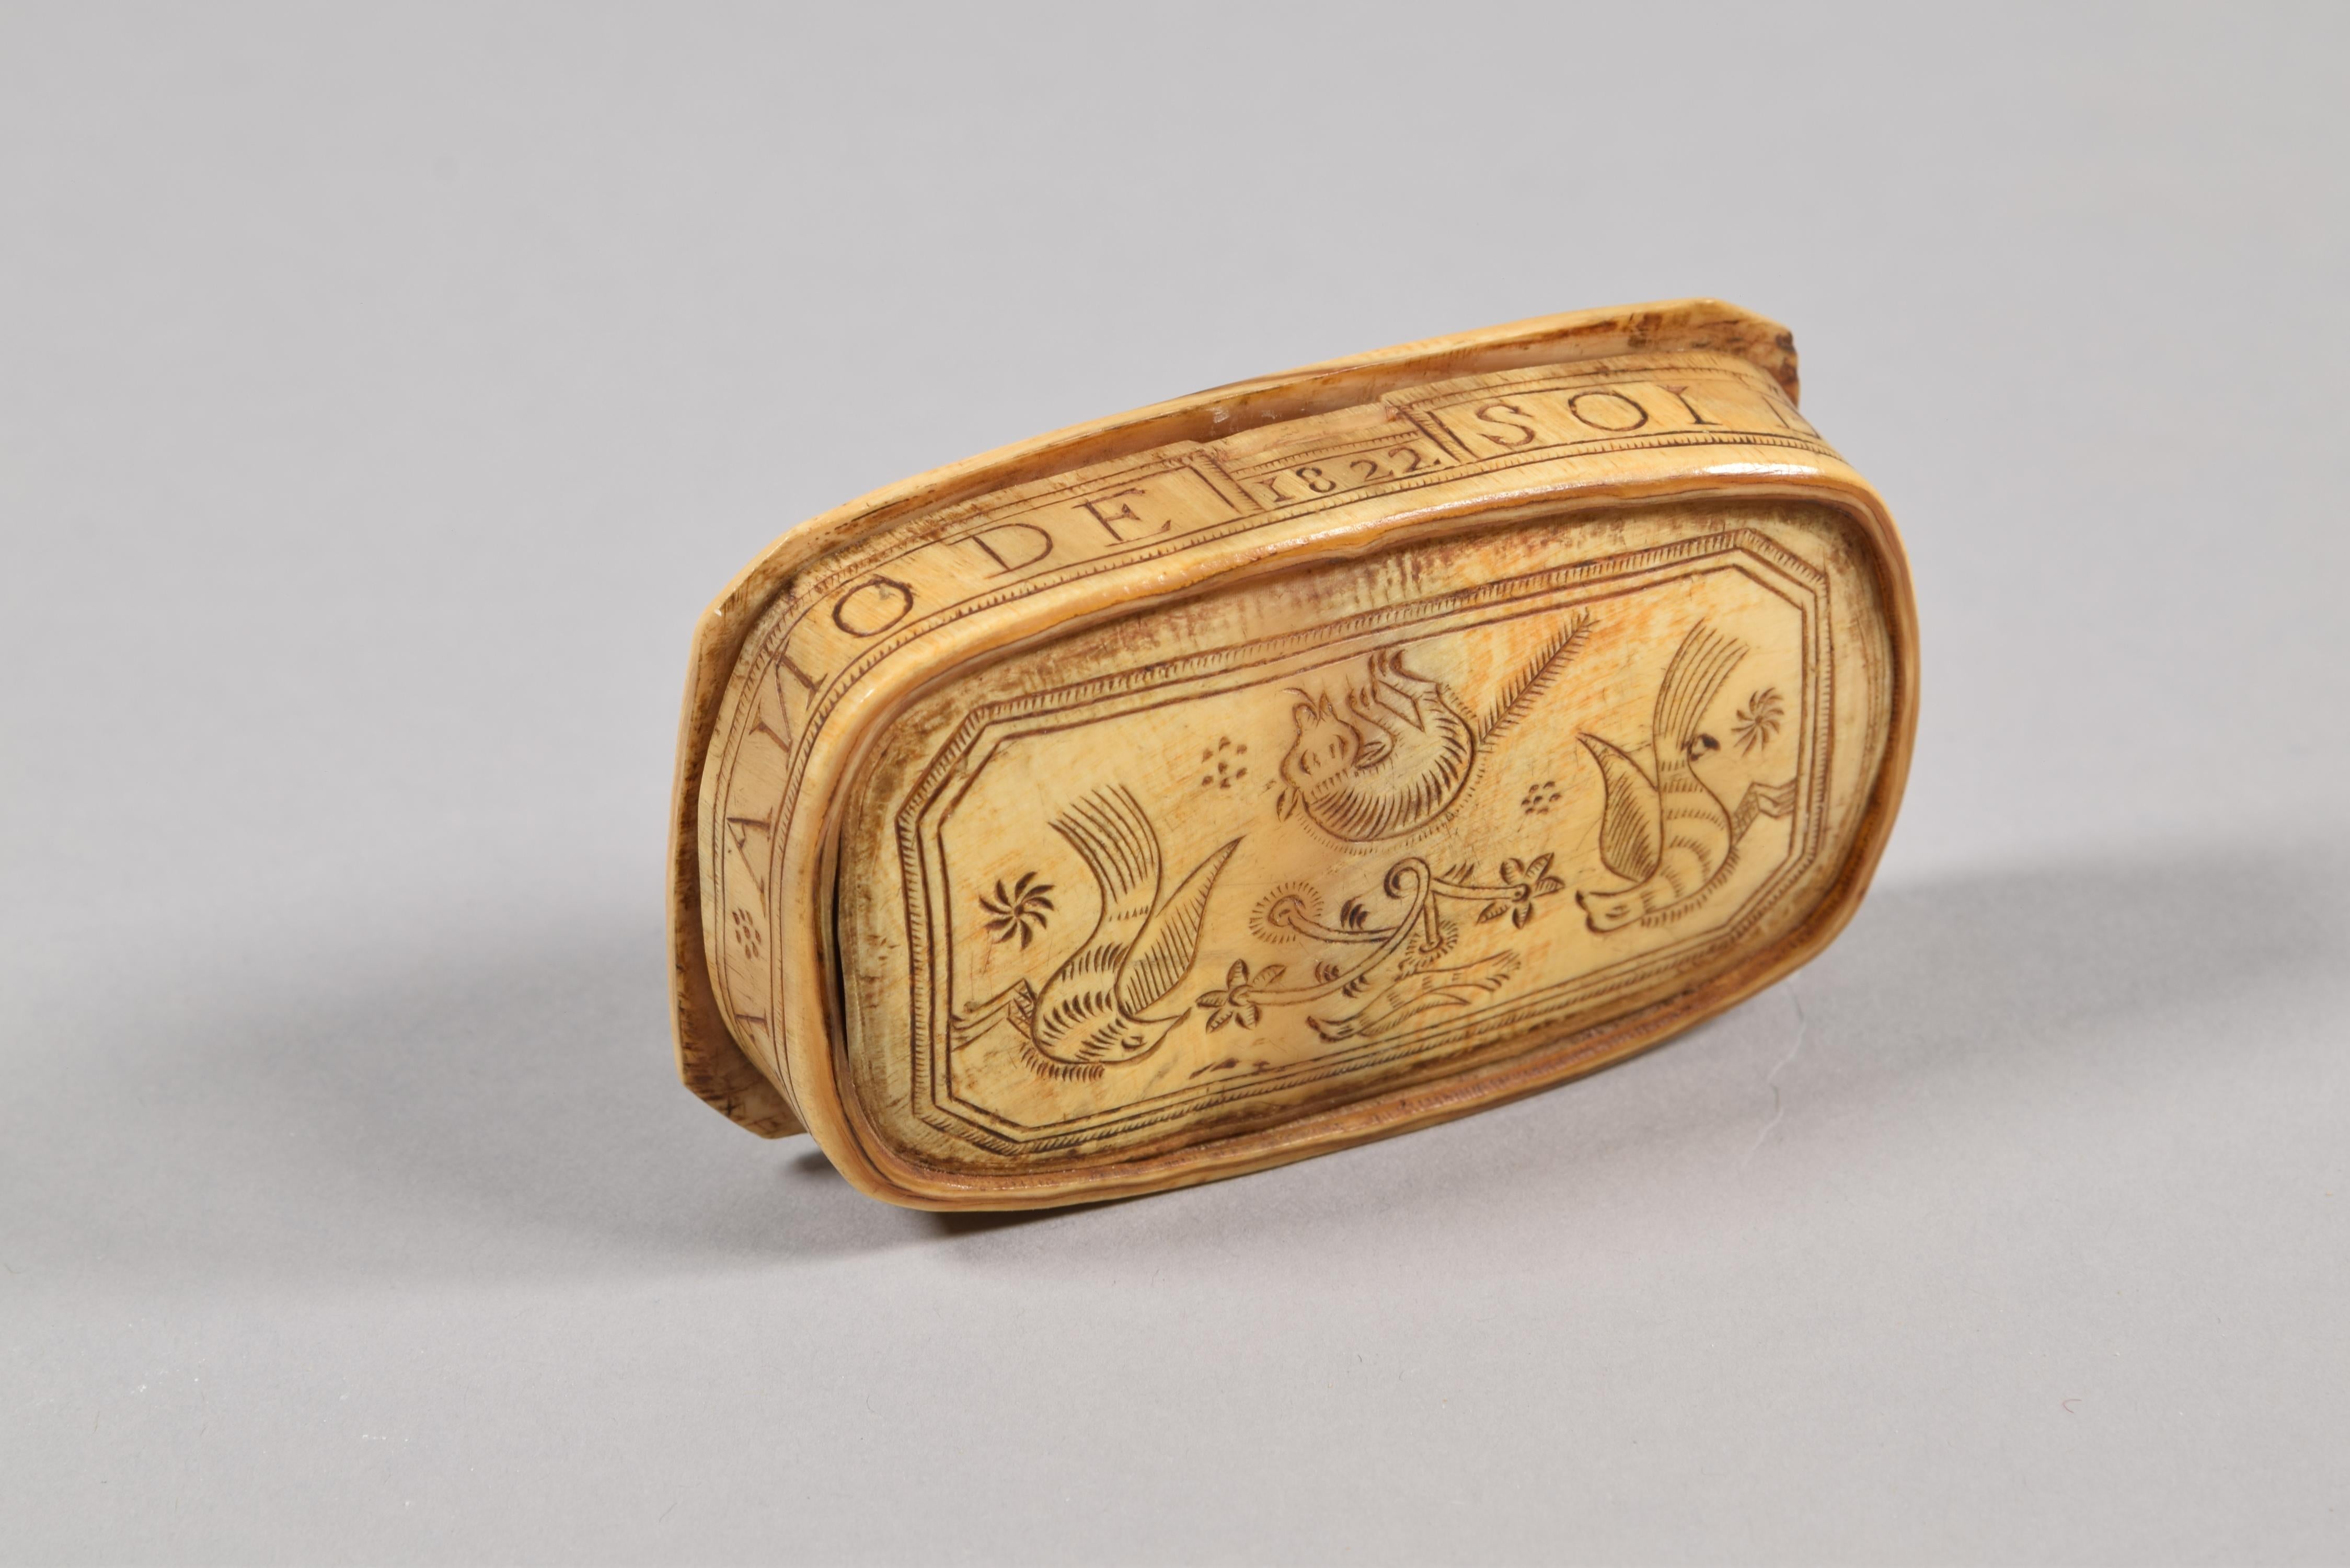 Shepherd box. Carved horn. Spain, 1822. 
 Rectangular box made of carved horn that has a date (1822) engraved on the lid and front, a legend (Soi de Manuel Zulueta year 1822) and an engraved decoration based on geometric, vegetal, figurative and